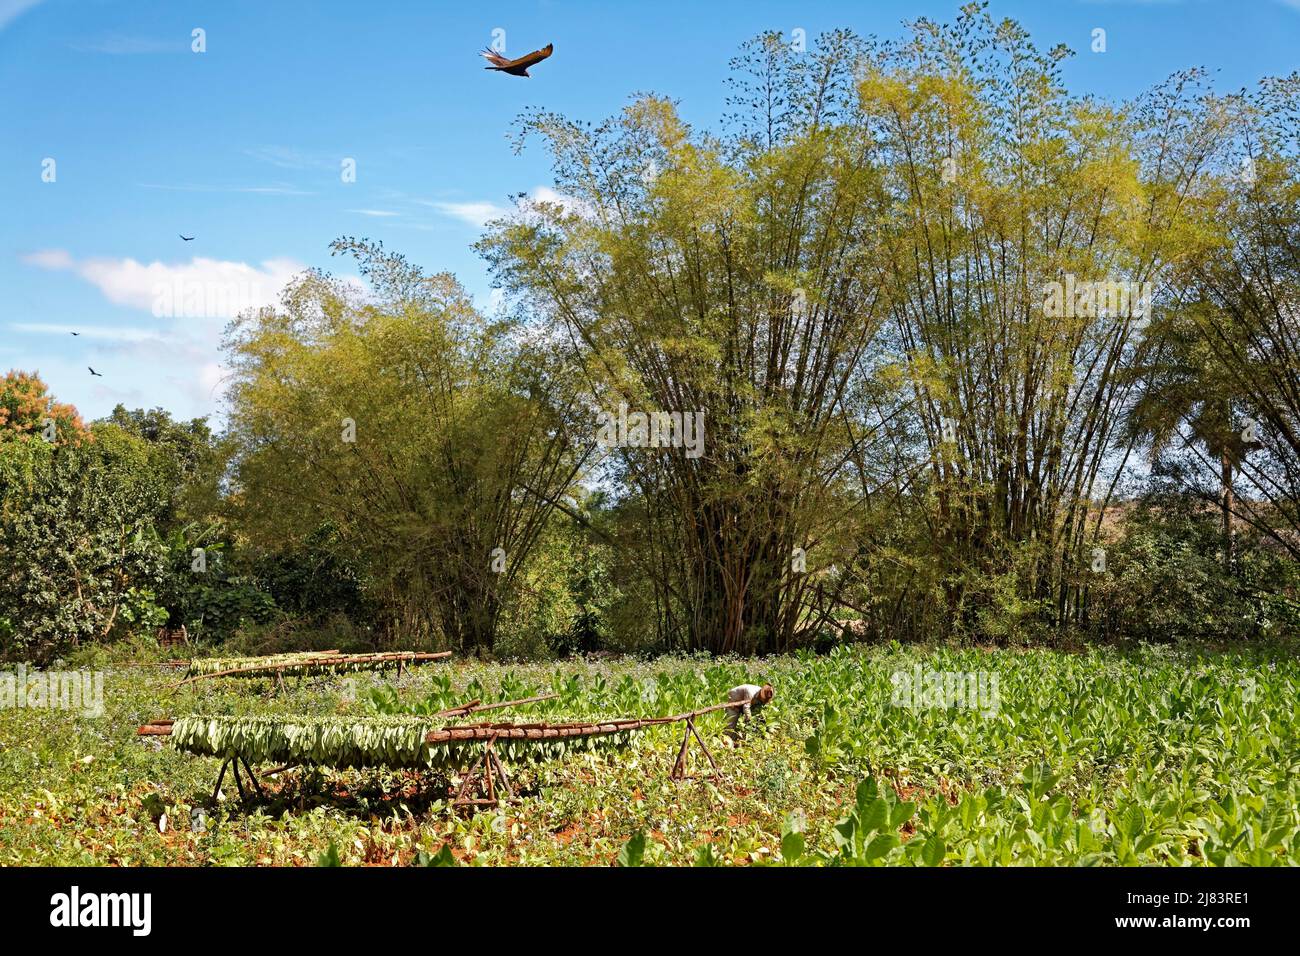 Tobacco farmer picking tobacco leaves in field, tobacco leaves drying on wooden rack, giant bamboo (Dendrocalamus giganteus), bird of prey, tobacco Stock Photo